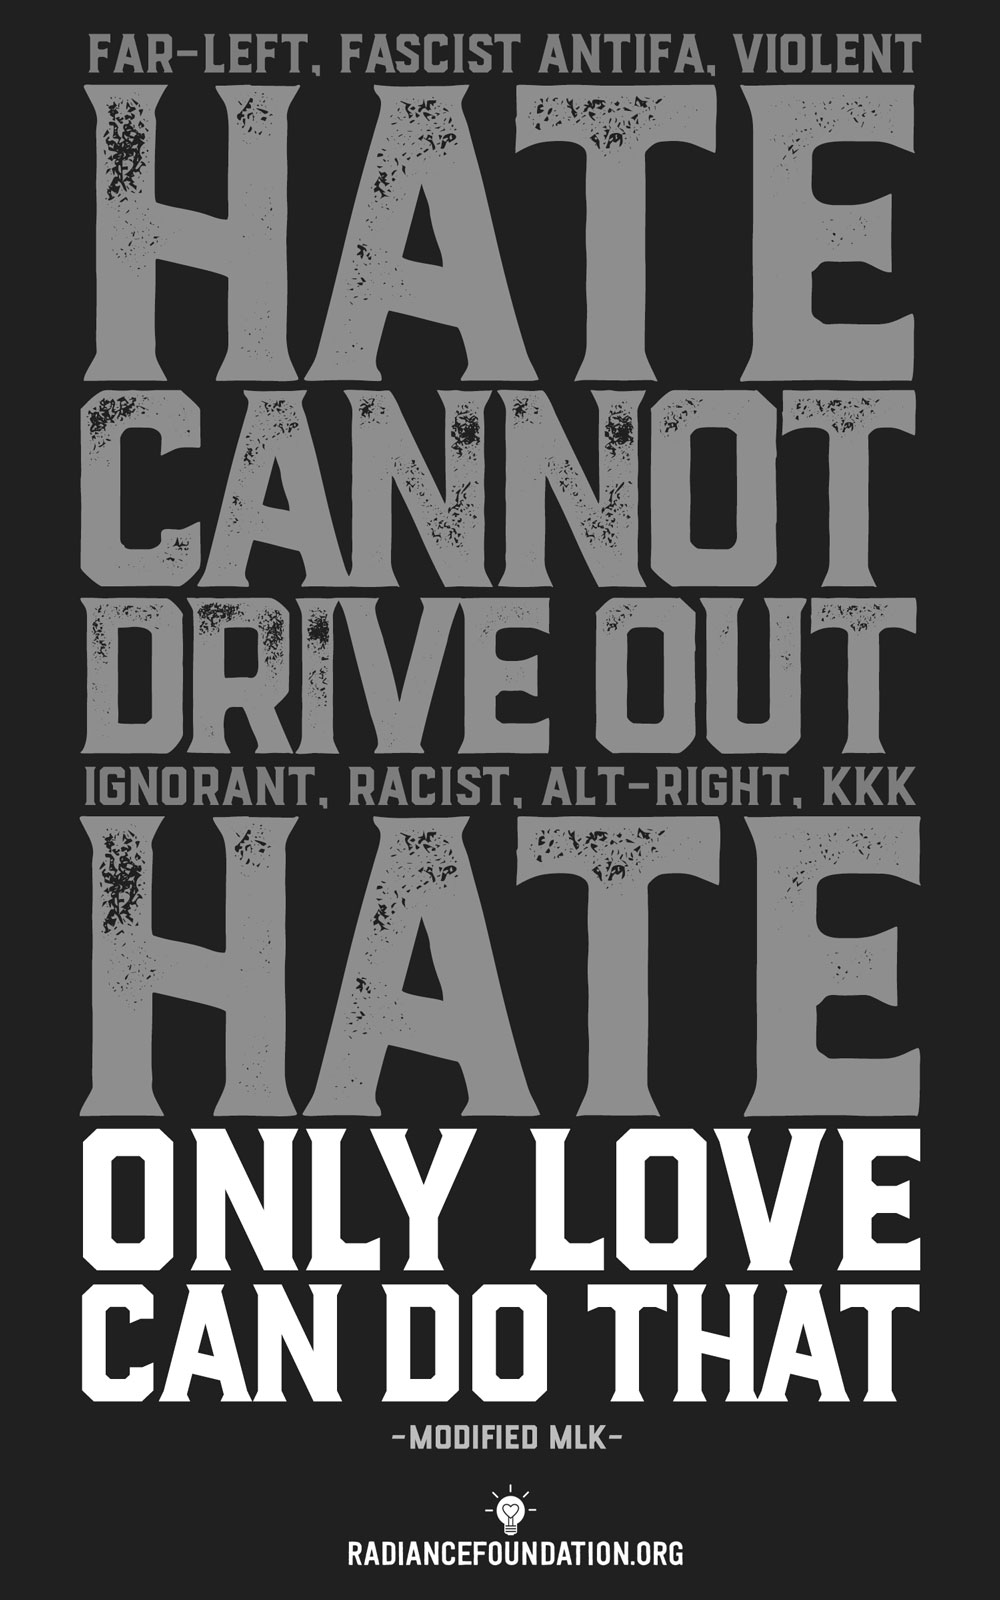 "Hate vs. Love" by Radiance Foundation